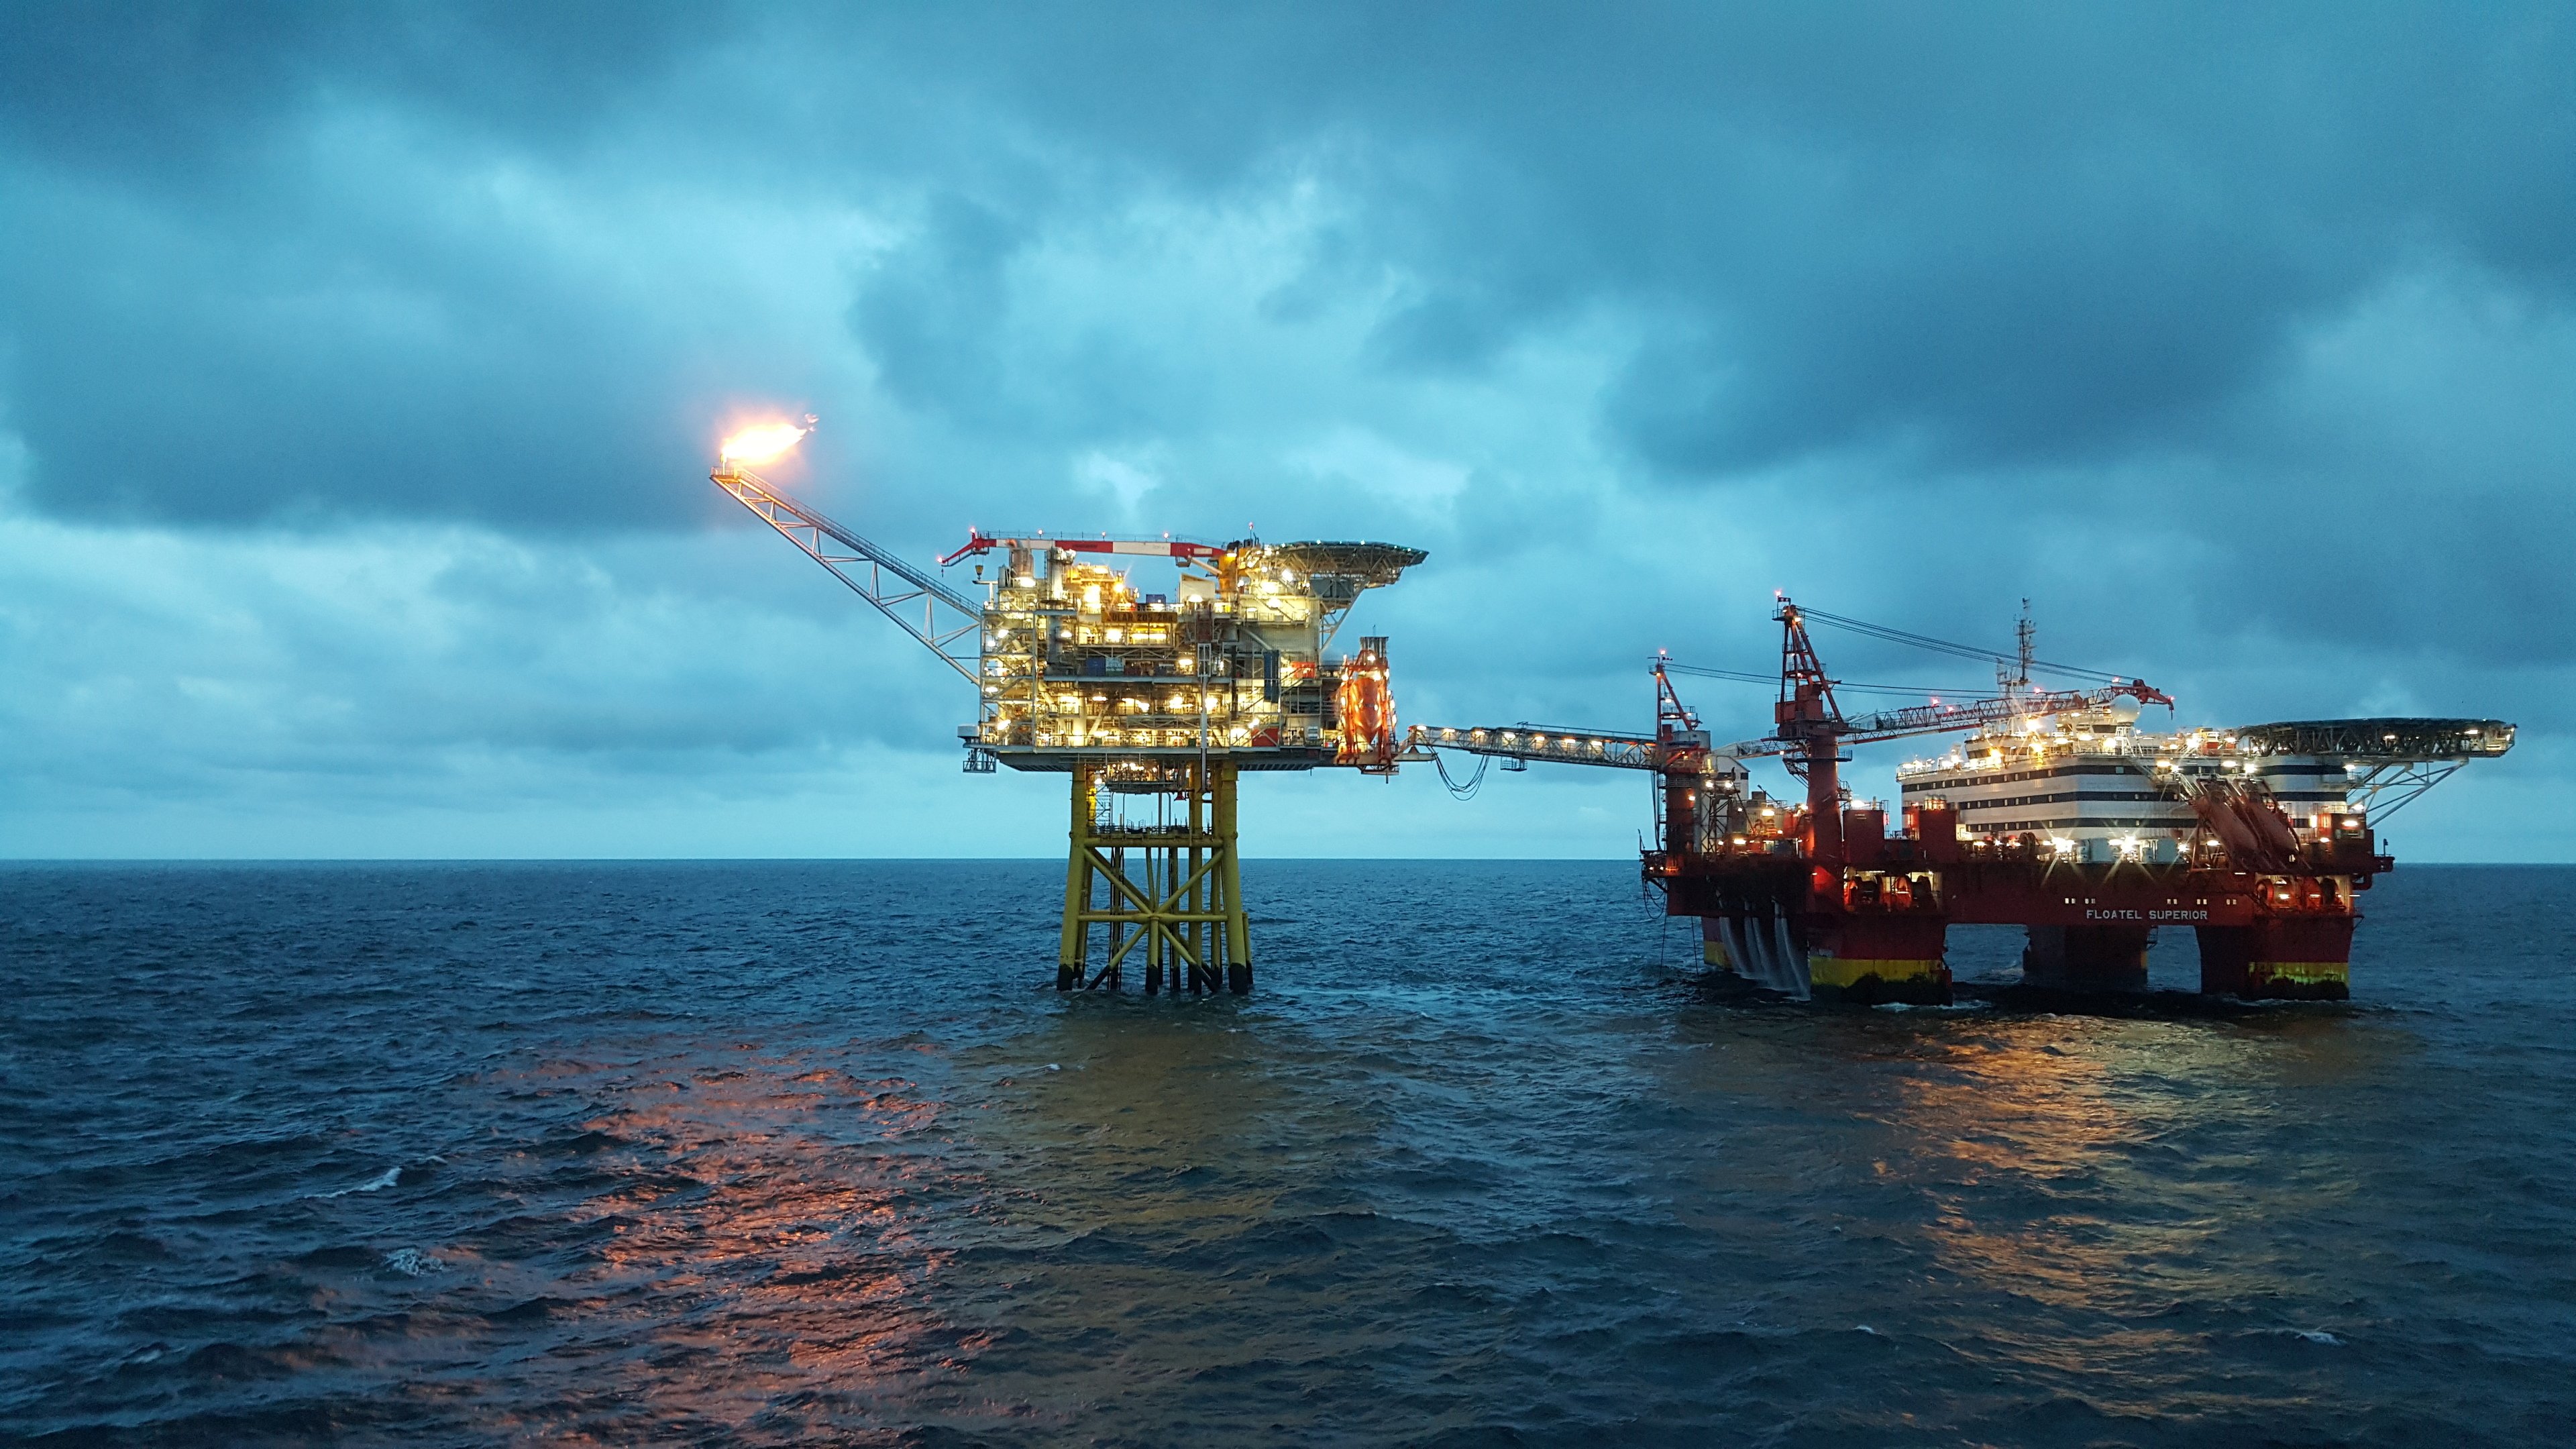 Premier's North Sea assets include the Solan field.